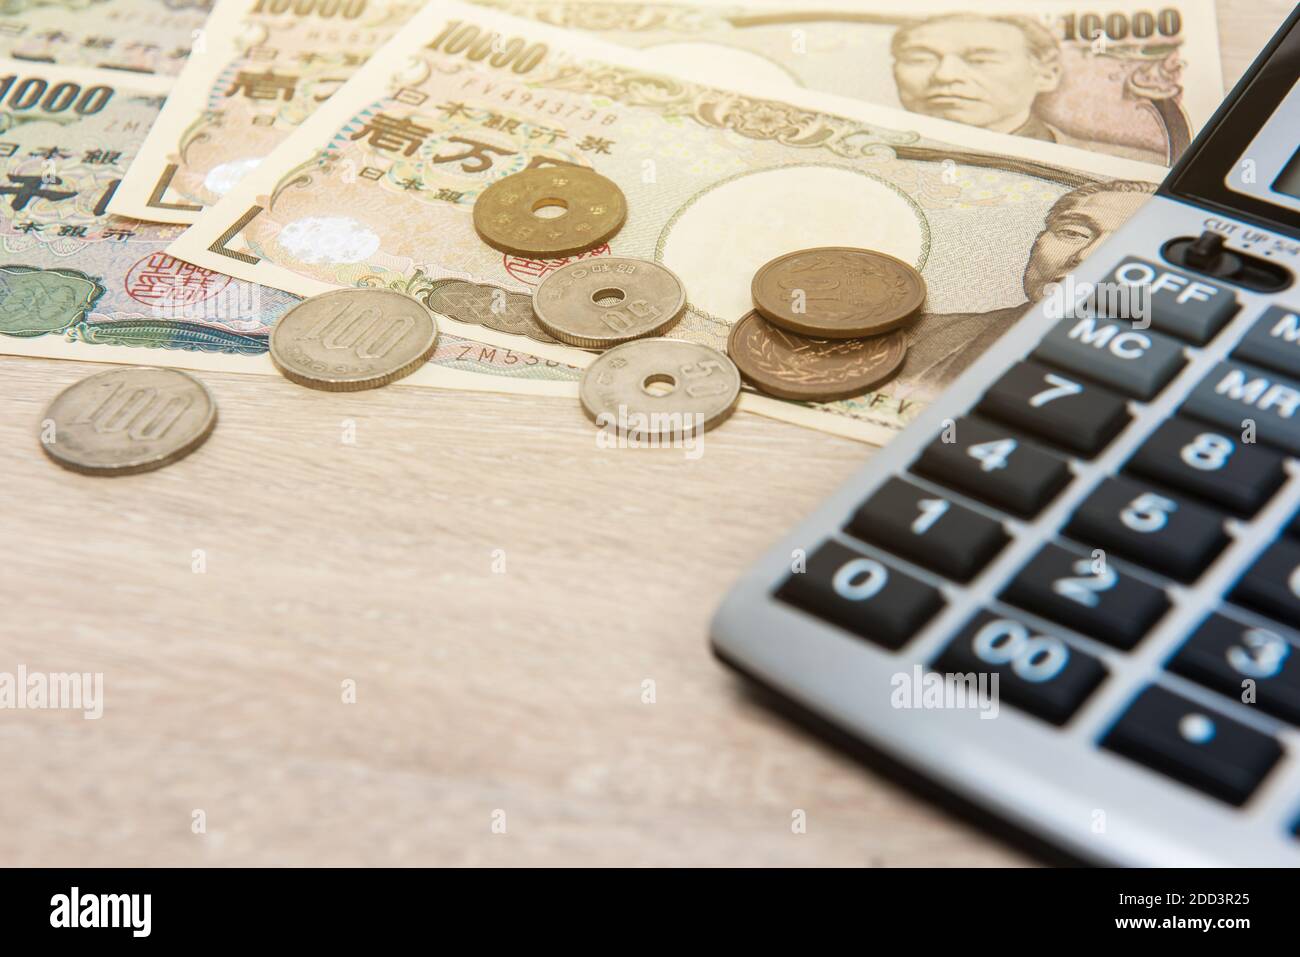 Money, Japanese Yen (JPY), with calculator on the table Stock Photo